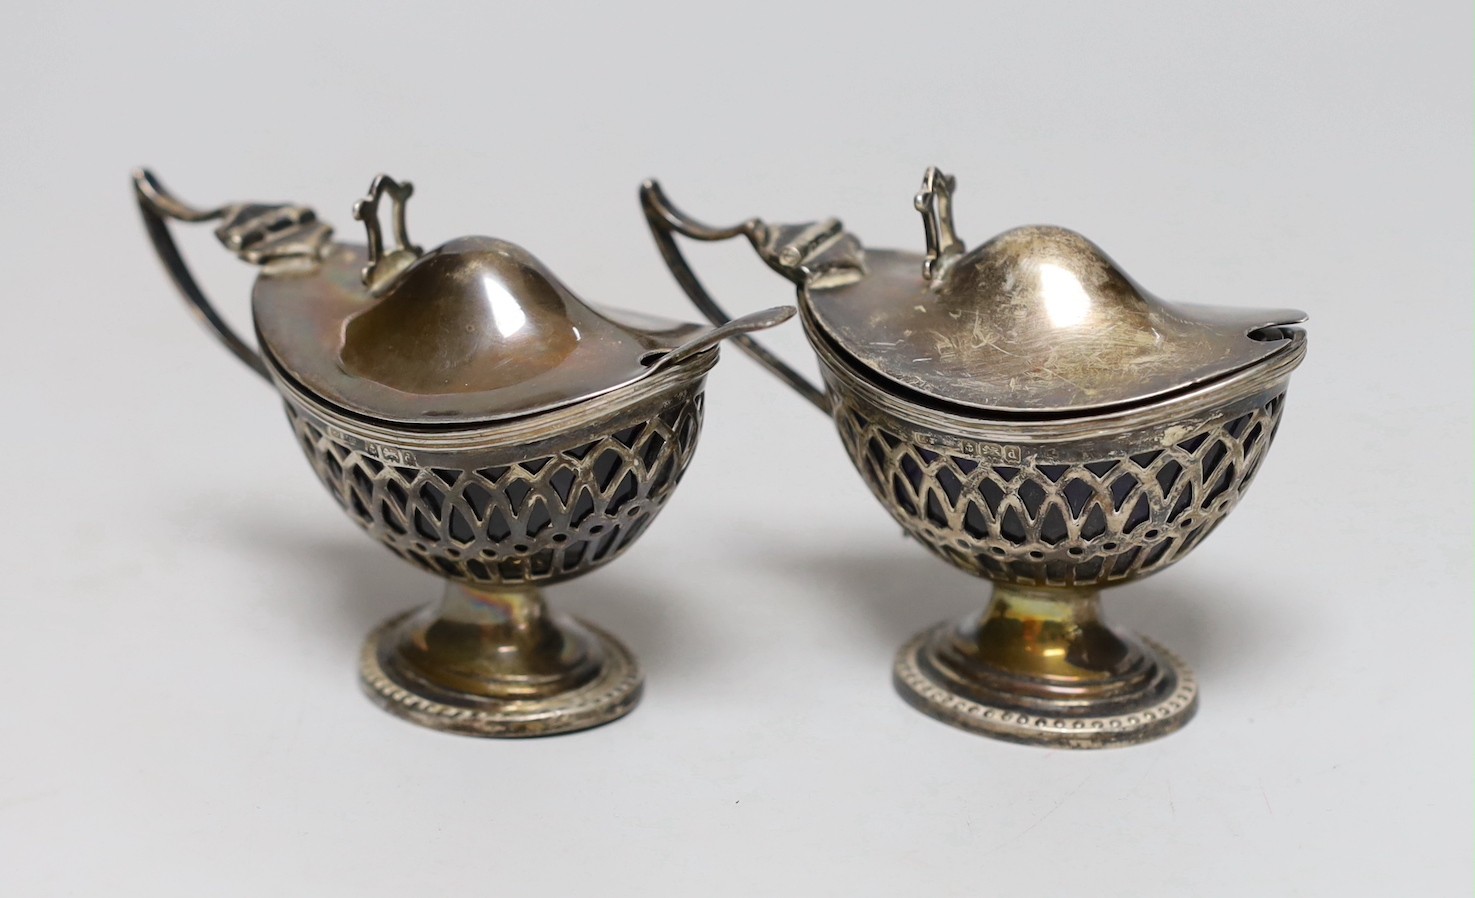 A pair of Edwardian pieced silver pedestal boat shaped mustard pots, E.S. Barnsley & Co, Birmingham, 1903, length 91mm, one with associated silver condiment spoon.